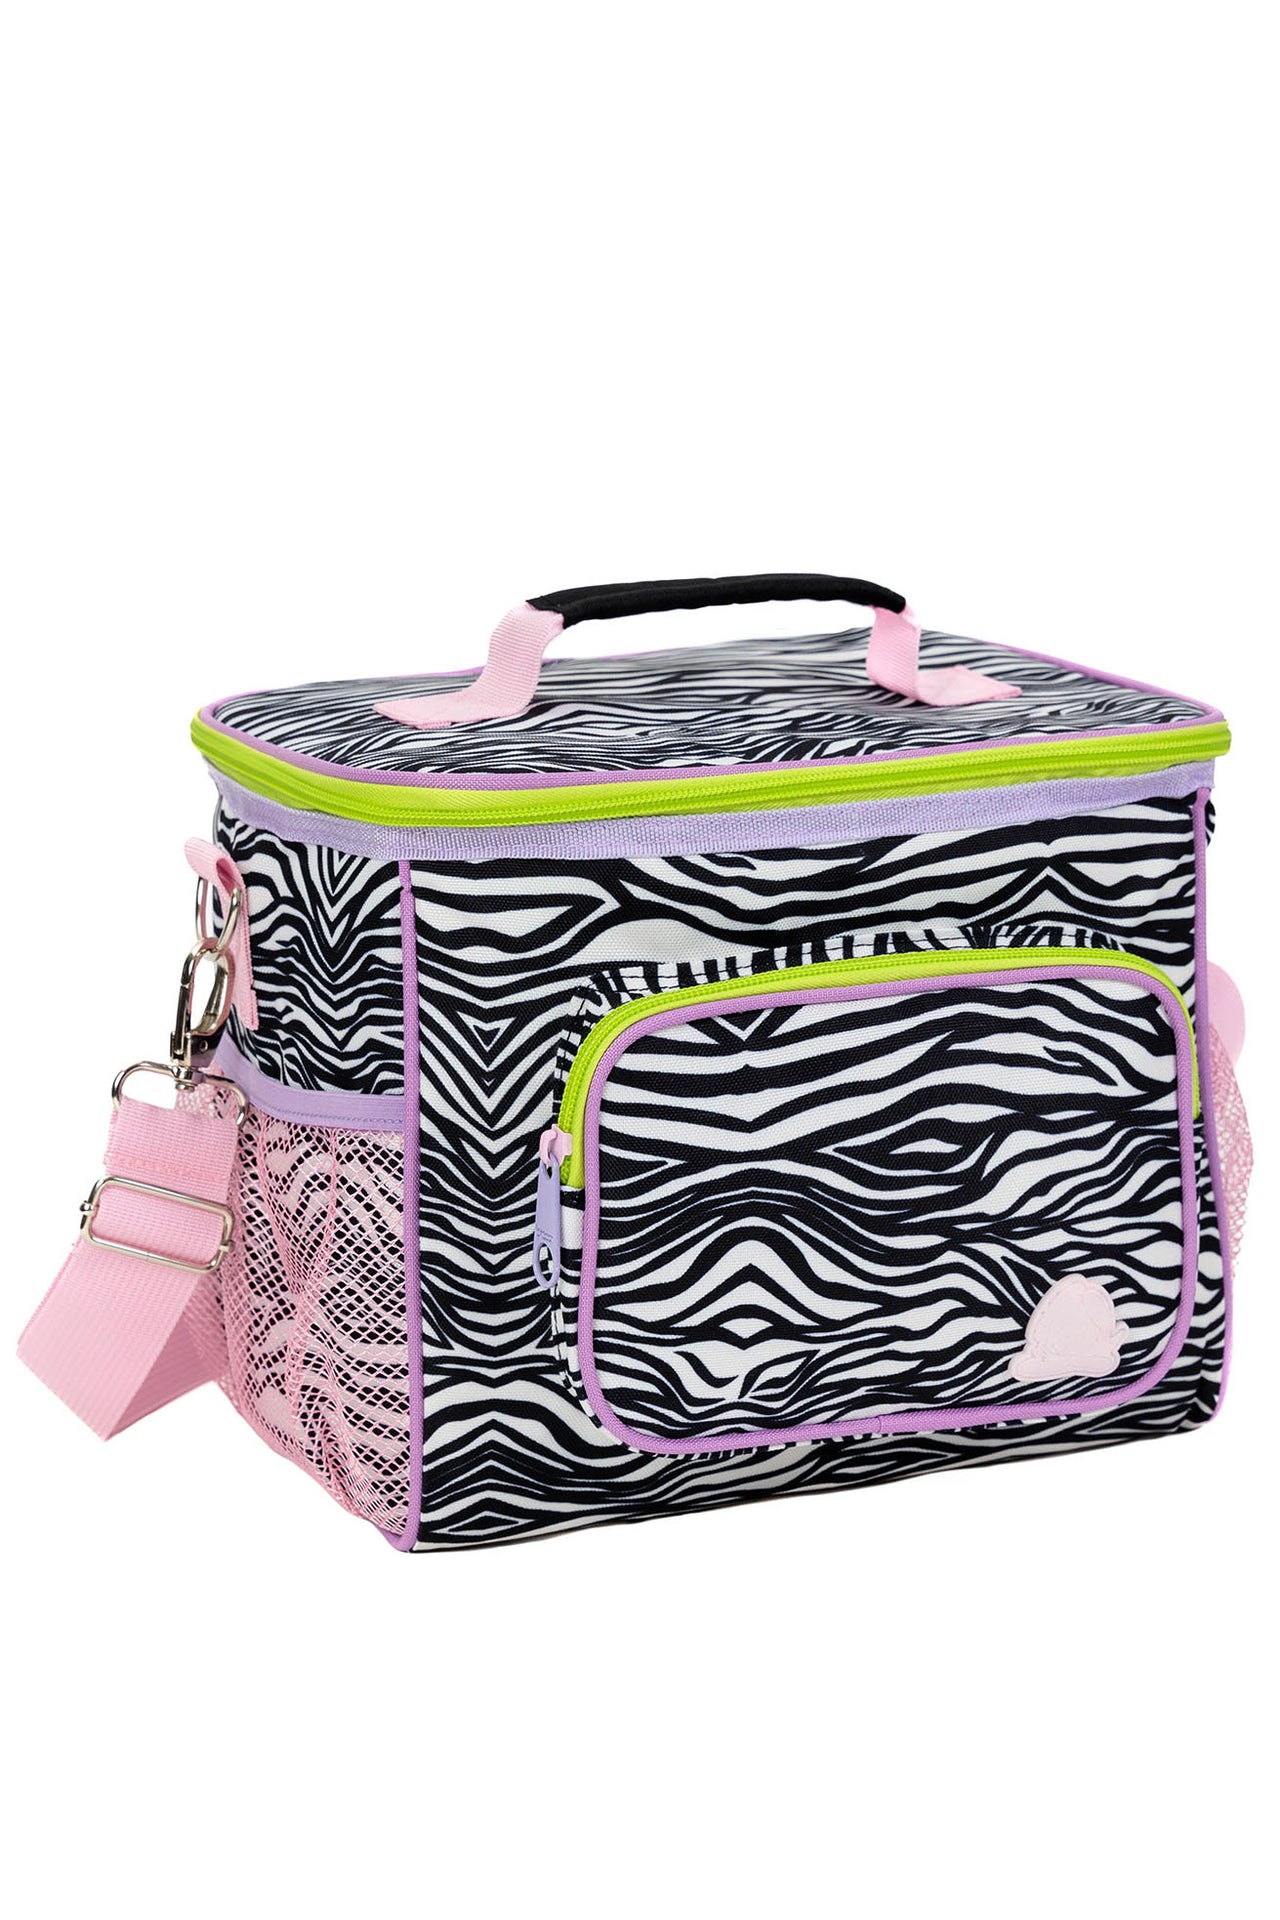 LUNCH BOX - ZEBRA COLLECTION